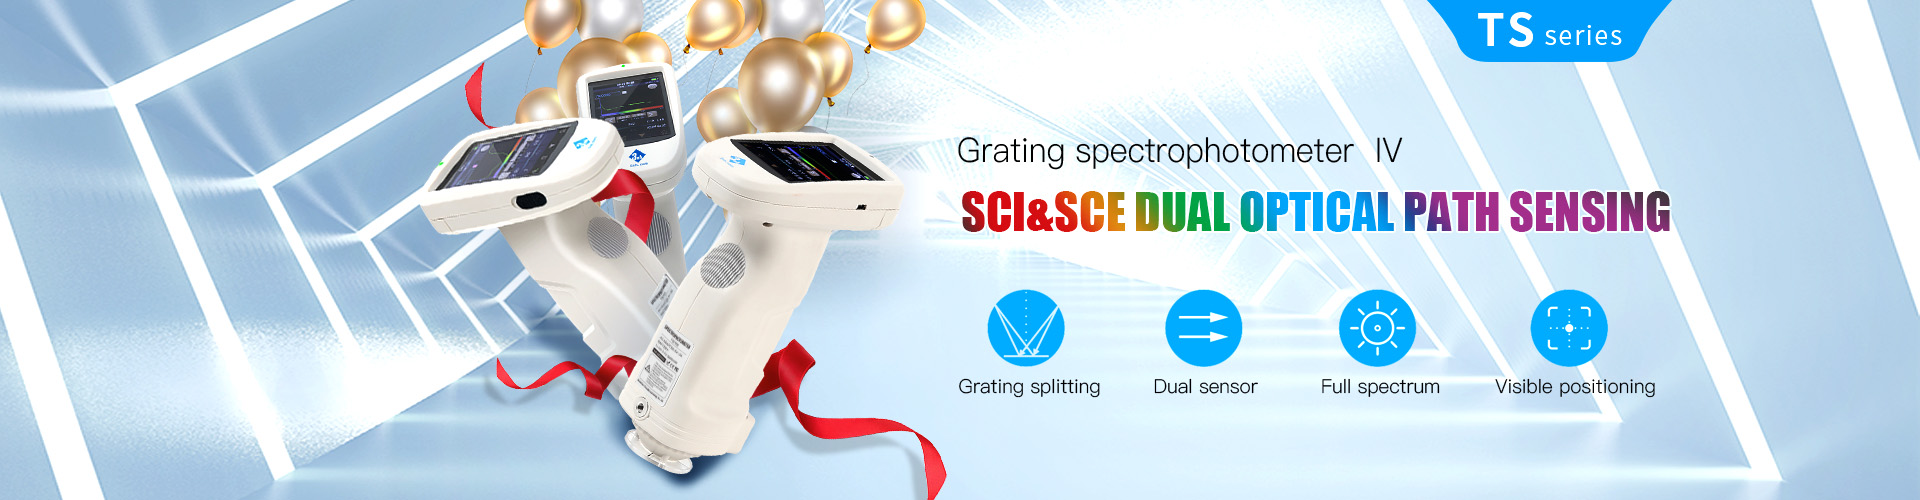 TS  Spectrophotometers